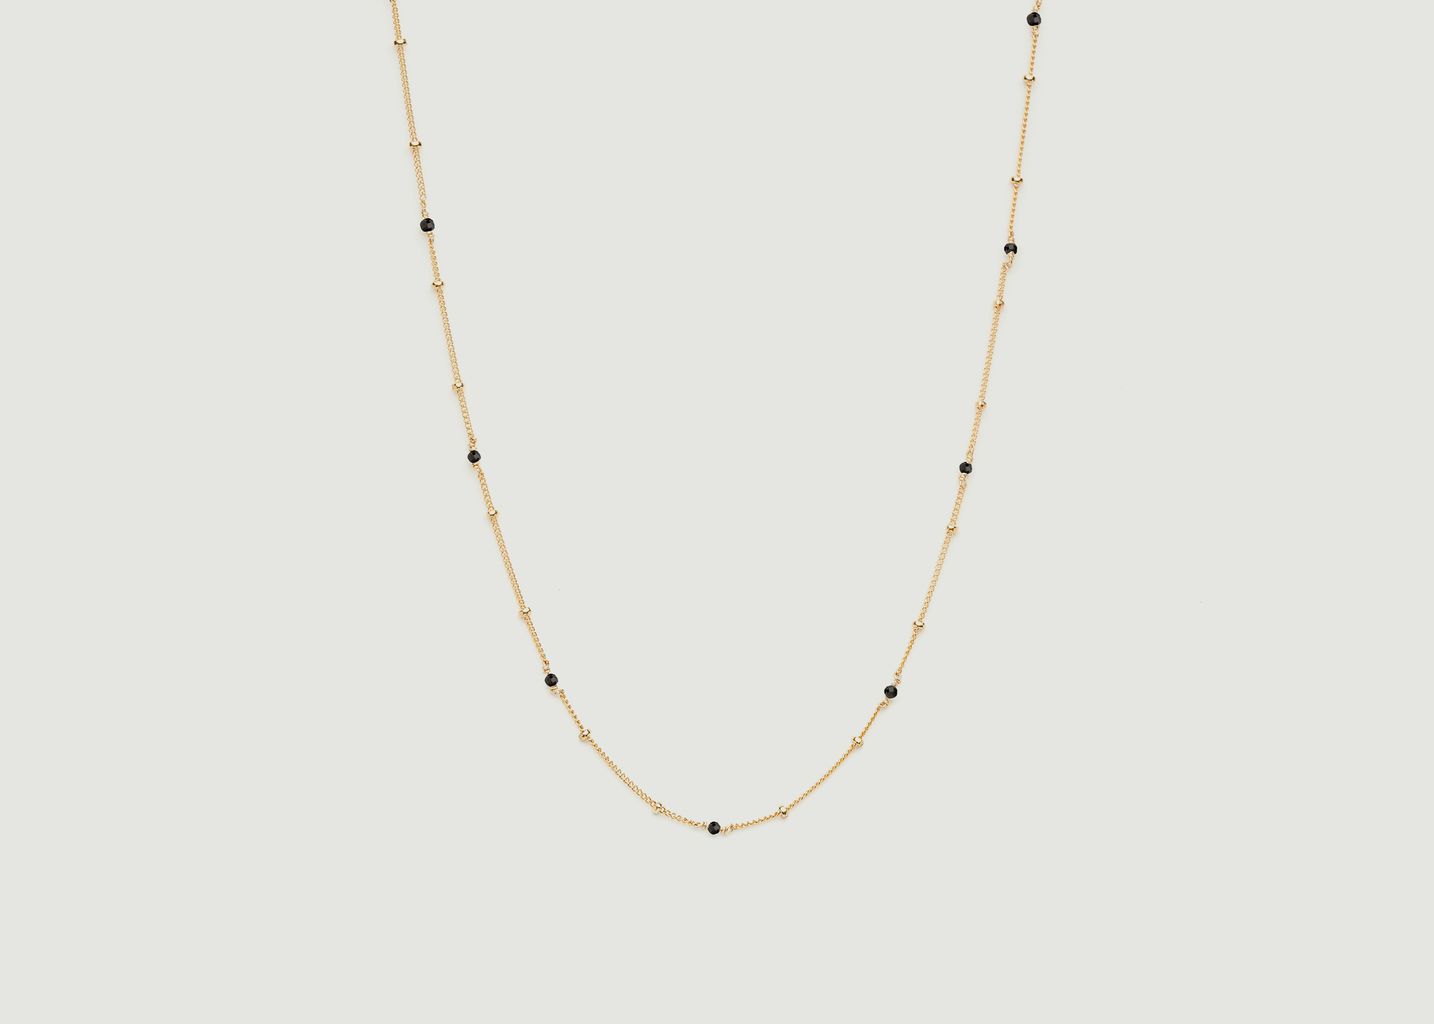 Satellite gold filled necklace with faceted stones - YAY